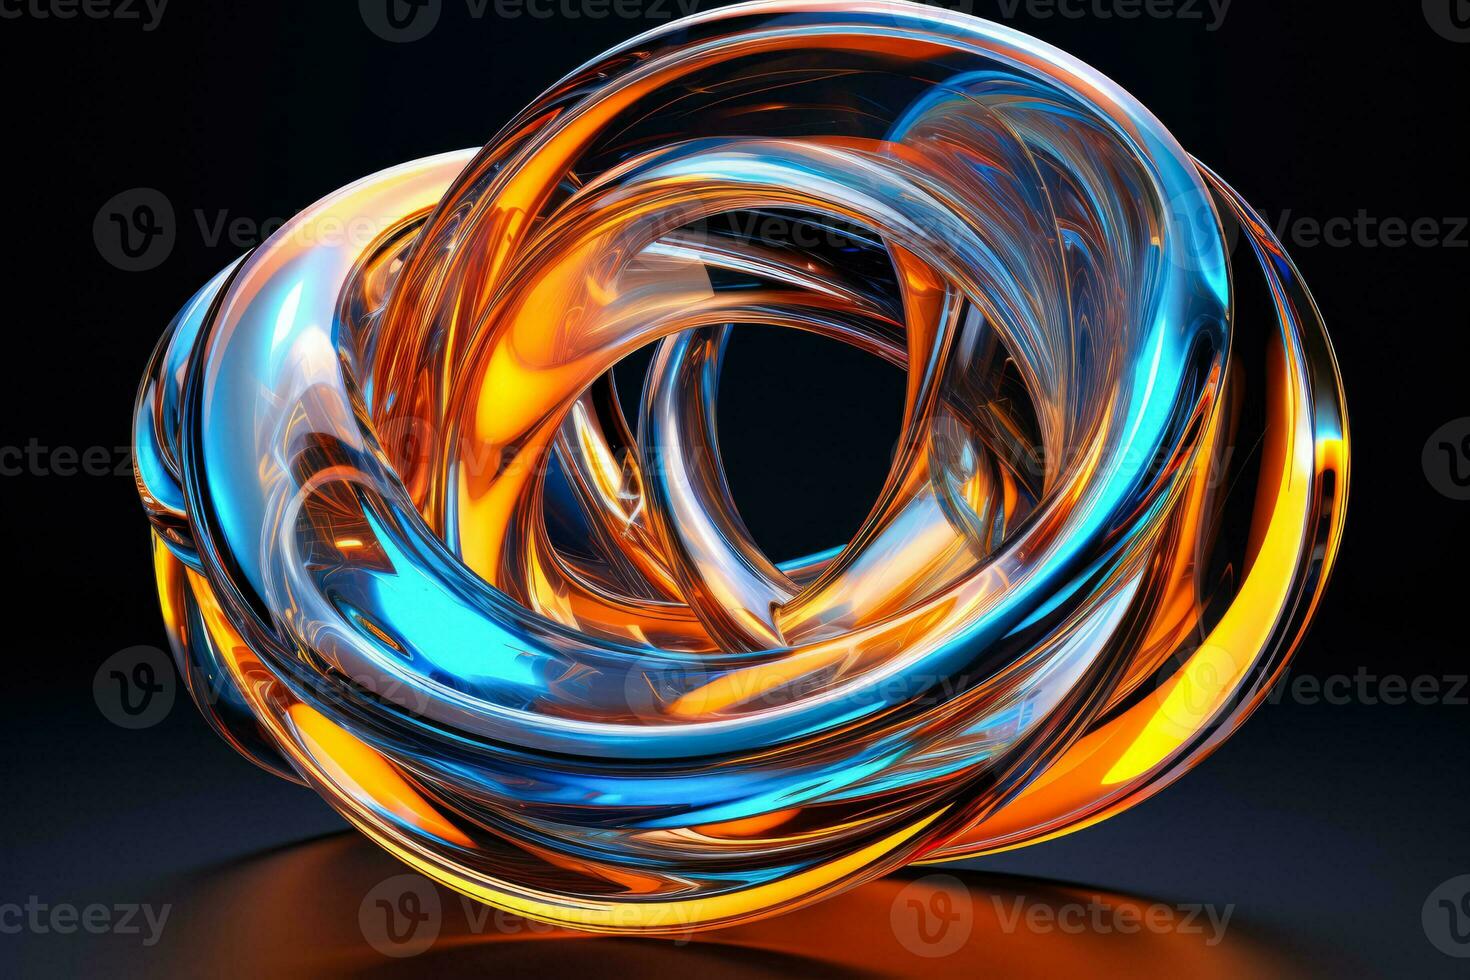 Abstract 3D object made of colorful glass perfect wallpaper background photo